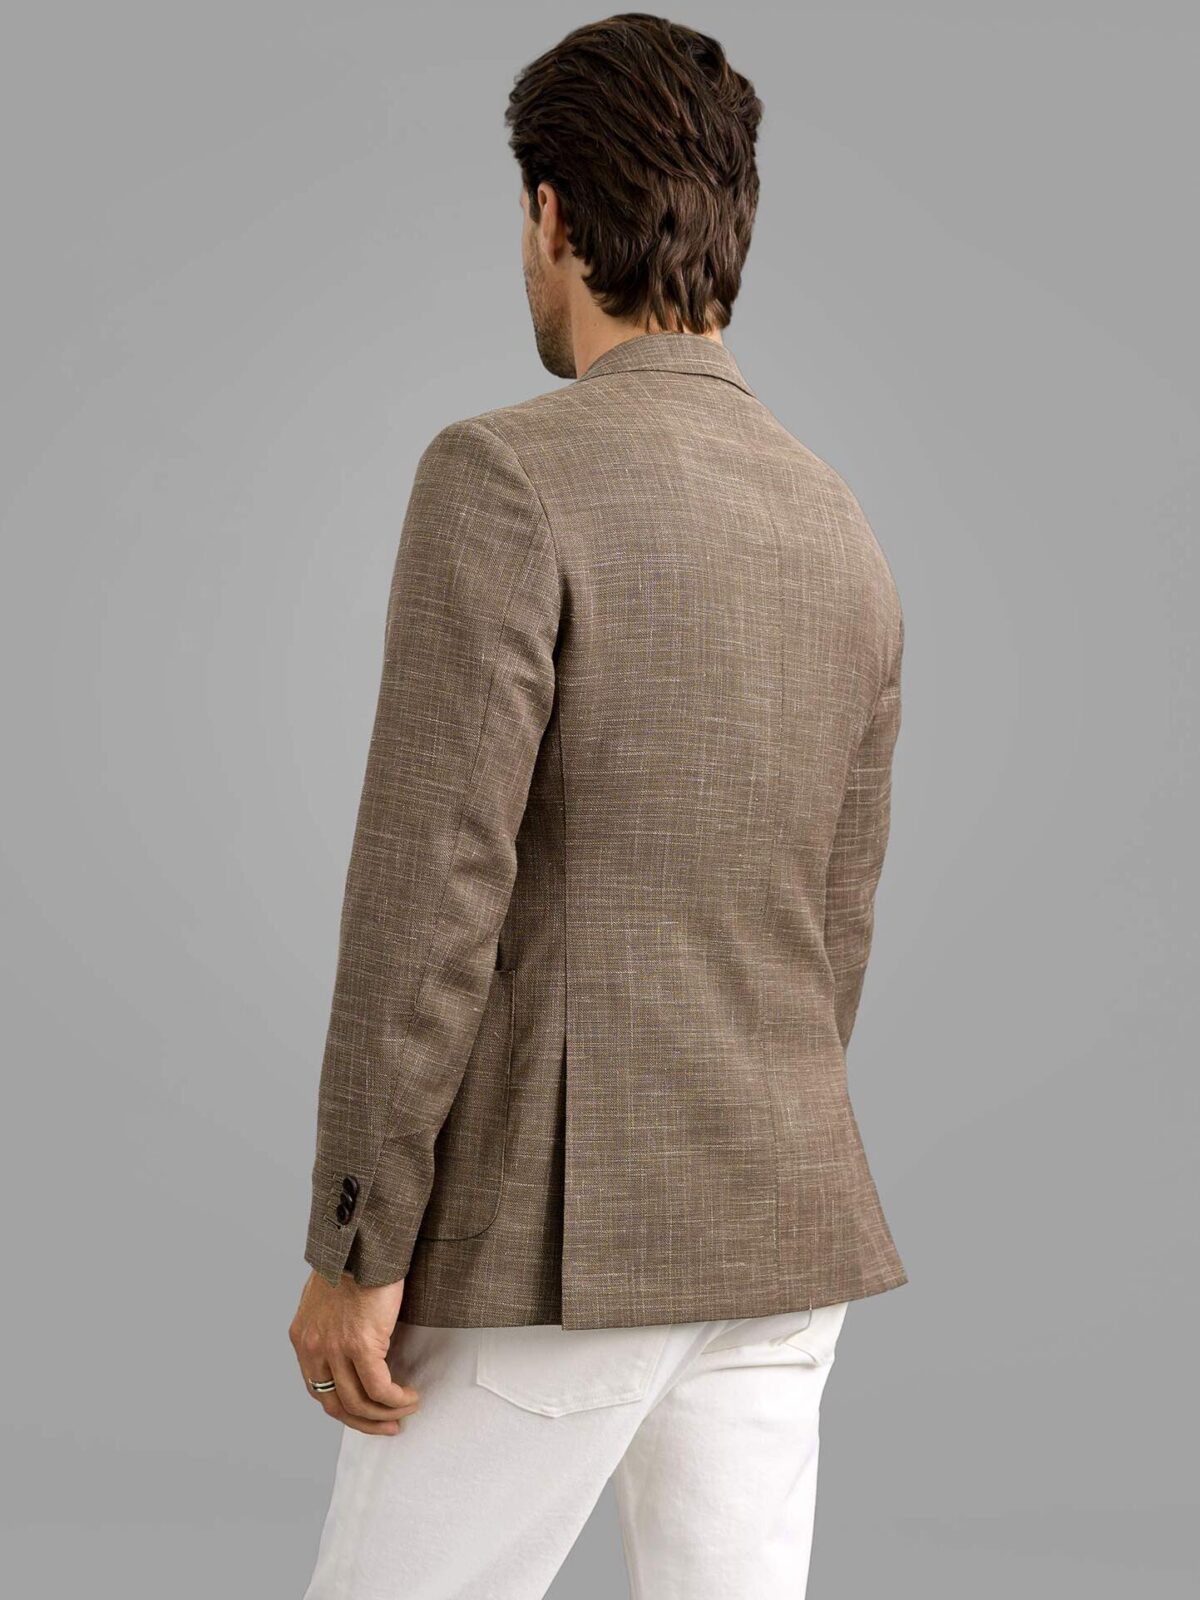 Mocha Wool and Linen Stretch Bedford Custom Tailored Fit - Clothing Jacket